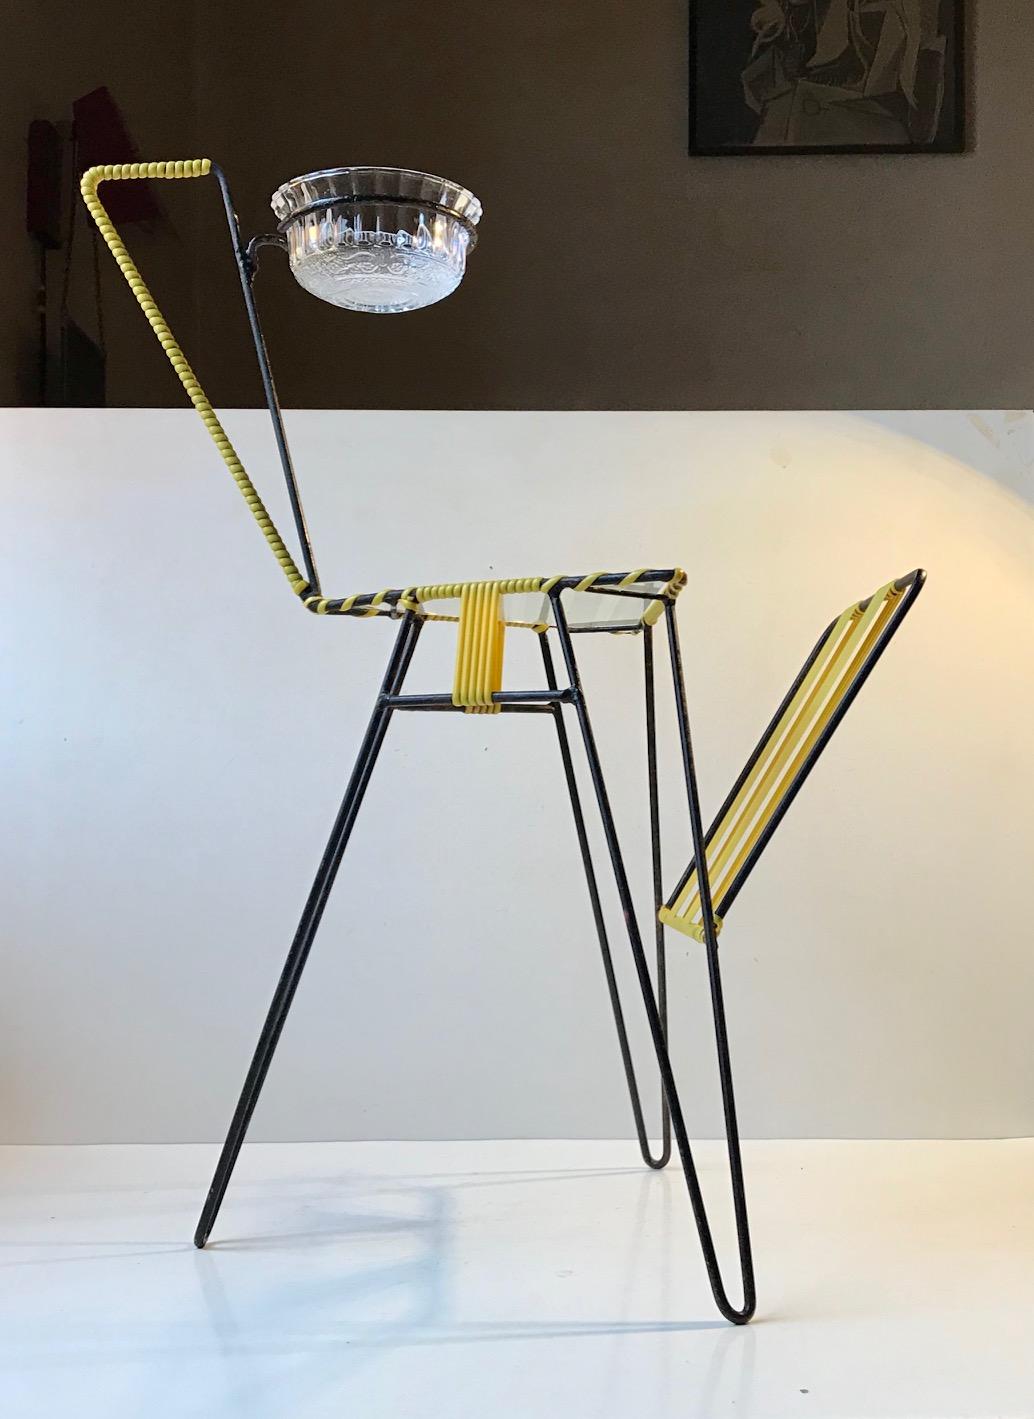 A graphic looking magazine rack with a removable bowl or ashtray. Its is commonly called the Giraffe due to its shape. The body is constructed from bend wire/string iron painted in black and with yellow acrylic cane details.